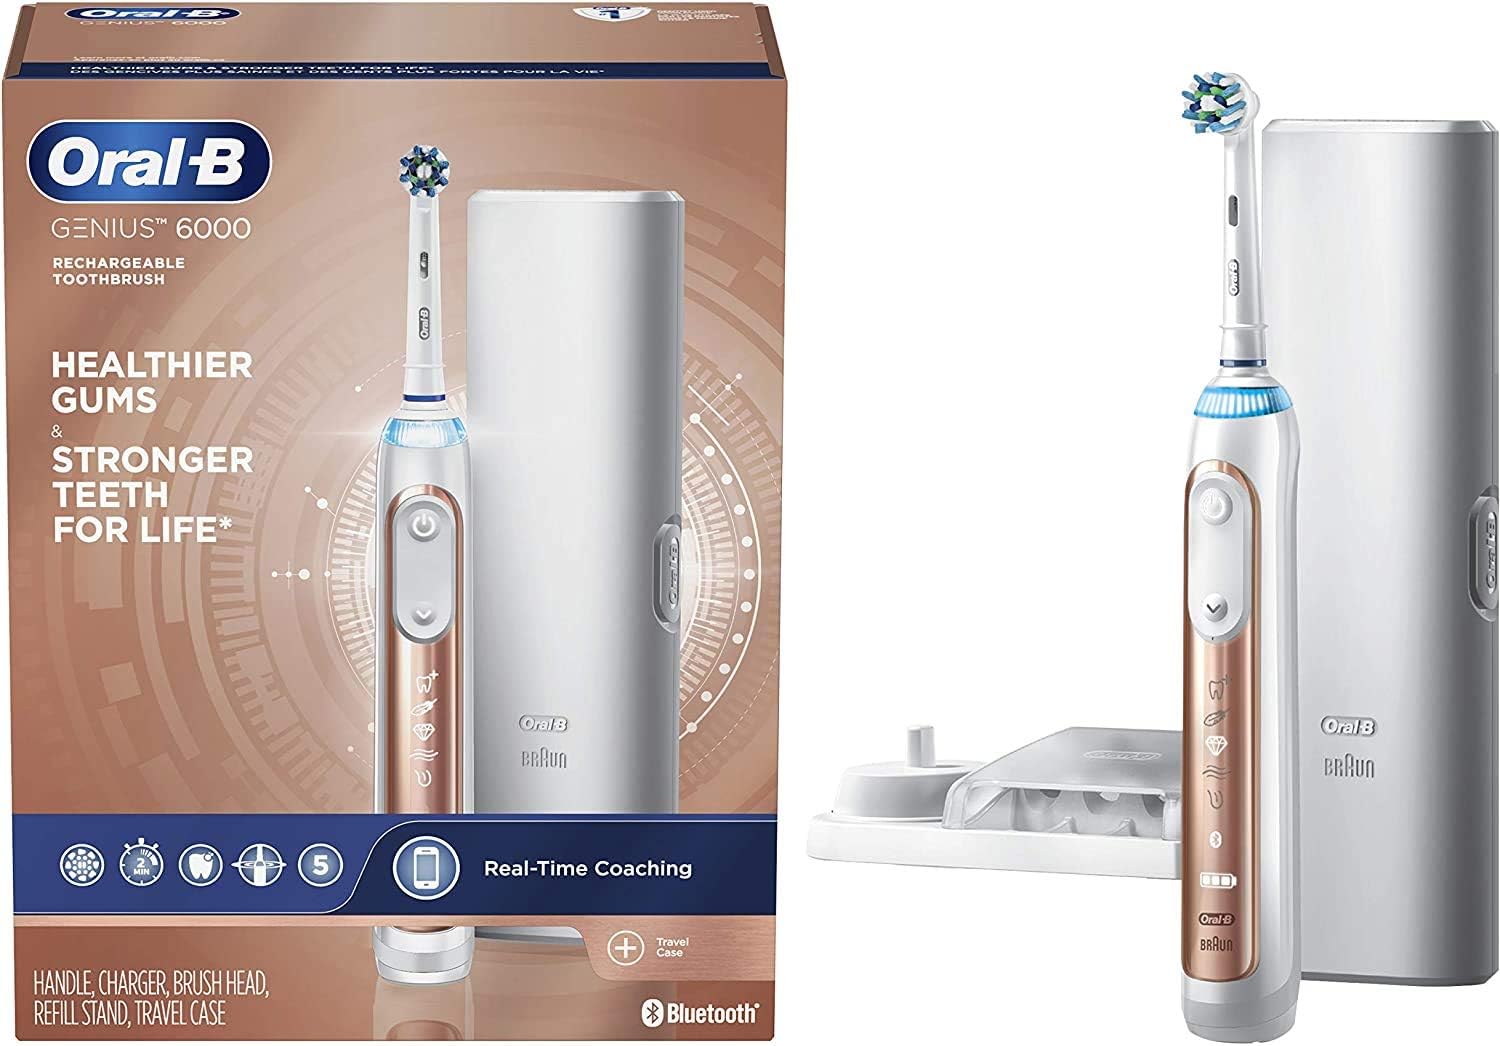 Oral-B Pro 6000 SmartSeries Electric Toothbrush